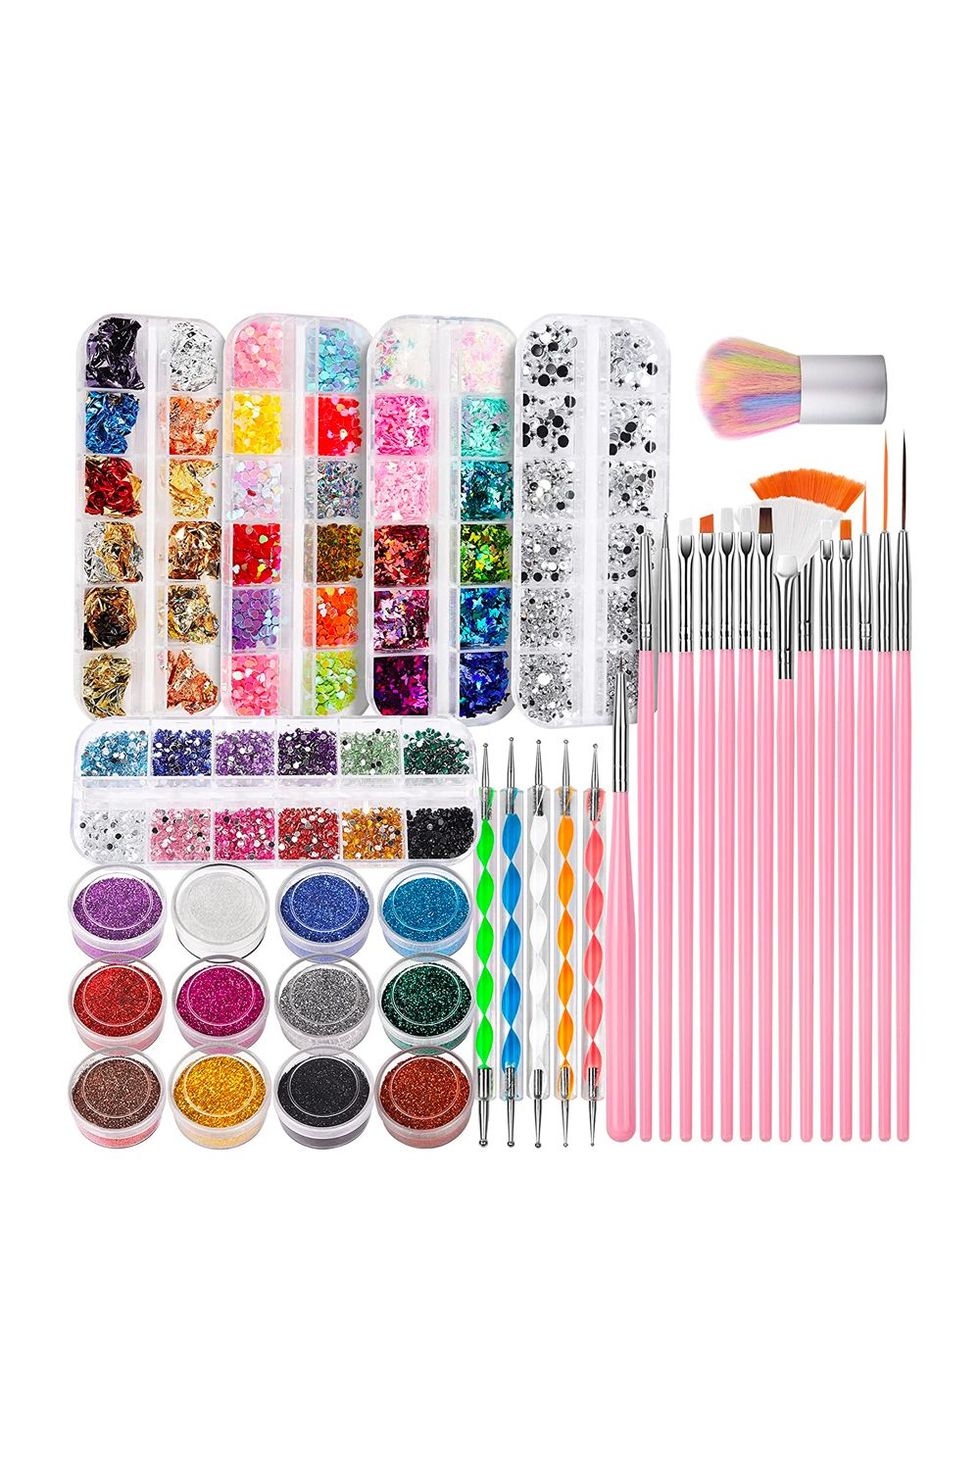 7 Different Types Of Nail Art Brushes That Anyone Can Try